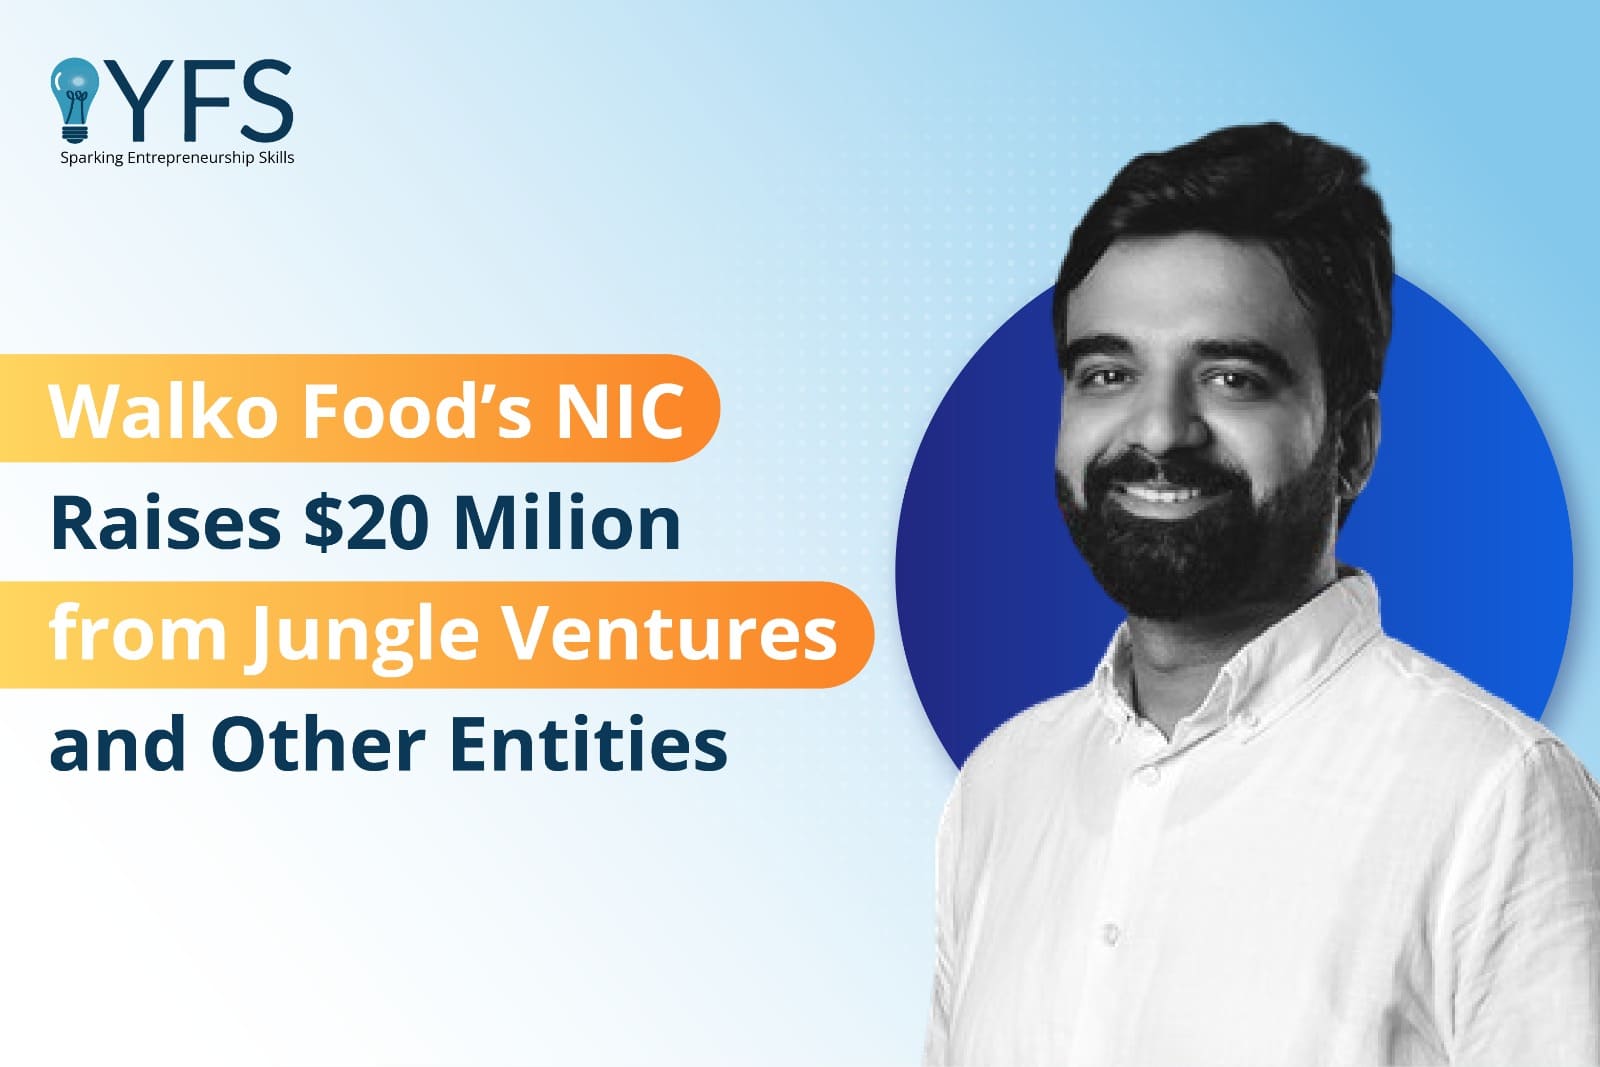 Walko Food’s NIC Raises $20 Million from Jungle Ventures and Other Entities